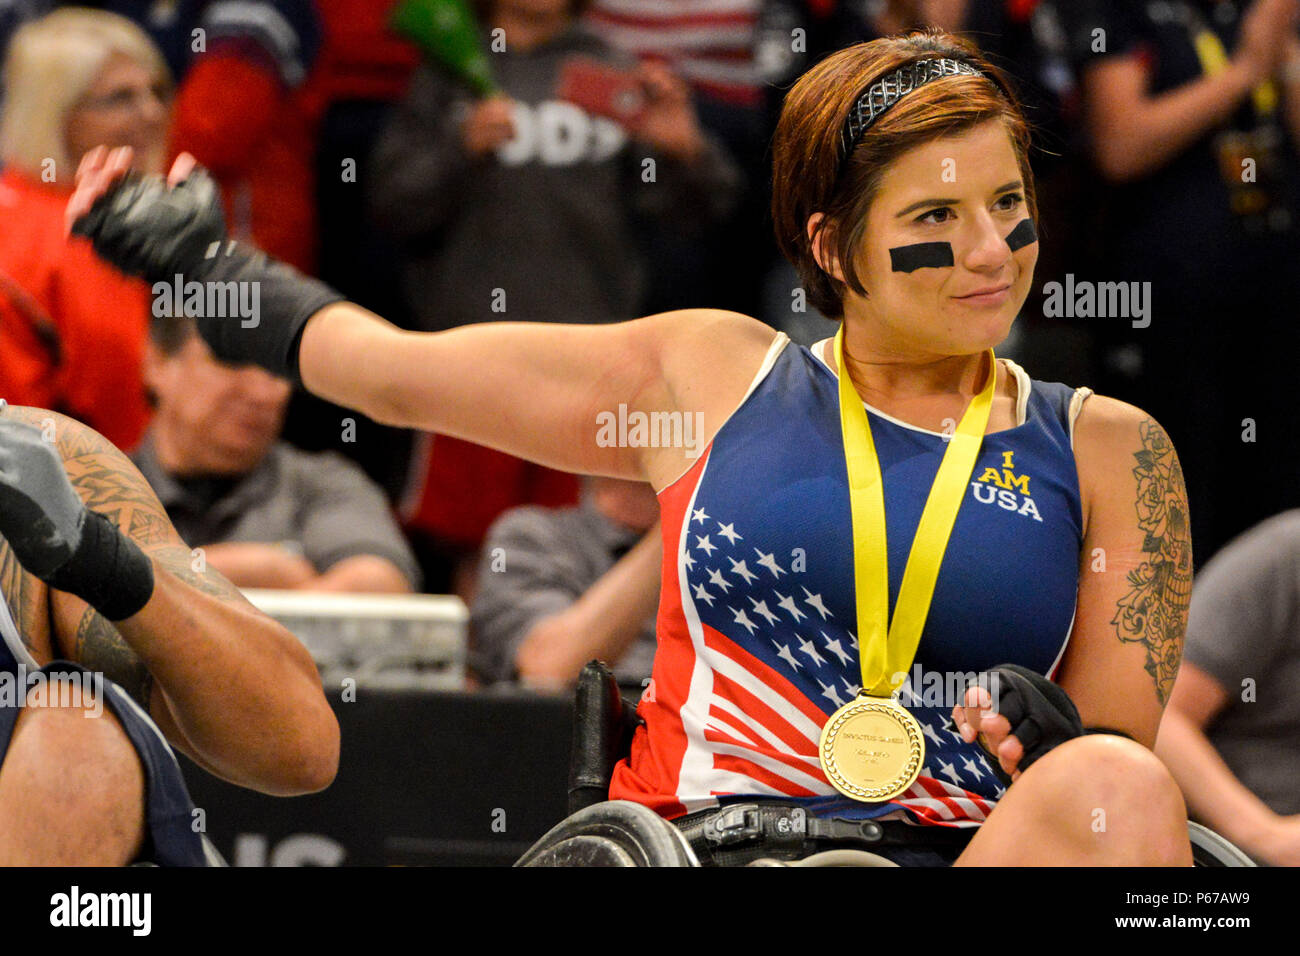 160511-F-WU507-108: Air Force Staff Sgt. Sebastiana Lopez-Arellano, Team US, stretches and smiles after U.S. Vice President Joe Biden presents her a gold metal, for winning the US versus Denmark wheel chair basketball gold metal match at the 2016 Invictus Games, at the ESPN Wide World of Sports complex at Walt Disney World, Orlando, Fla., May 11, 2016. The US beat Denmark 28-19, and took gold; Denmark took silver and the bronze went to the UK, who beat Australia 47-4. (U.S. Air Force photo by Senior Master Sgt. Kevin Wallace/RELEASED) Stock Photo